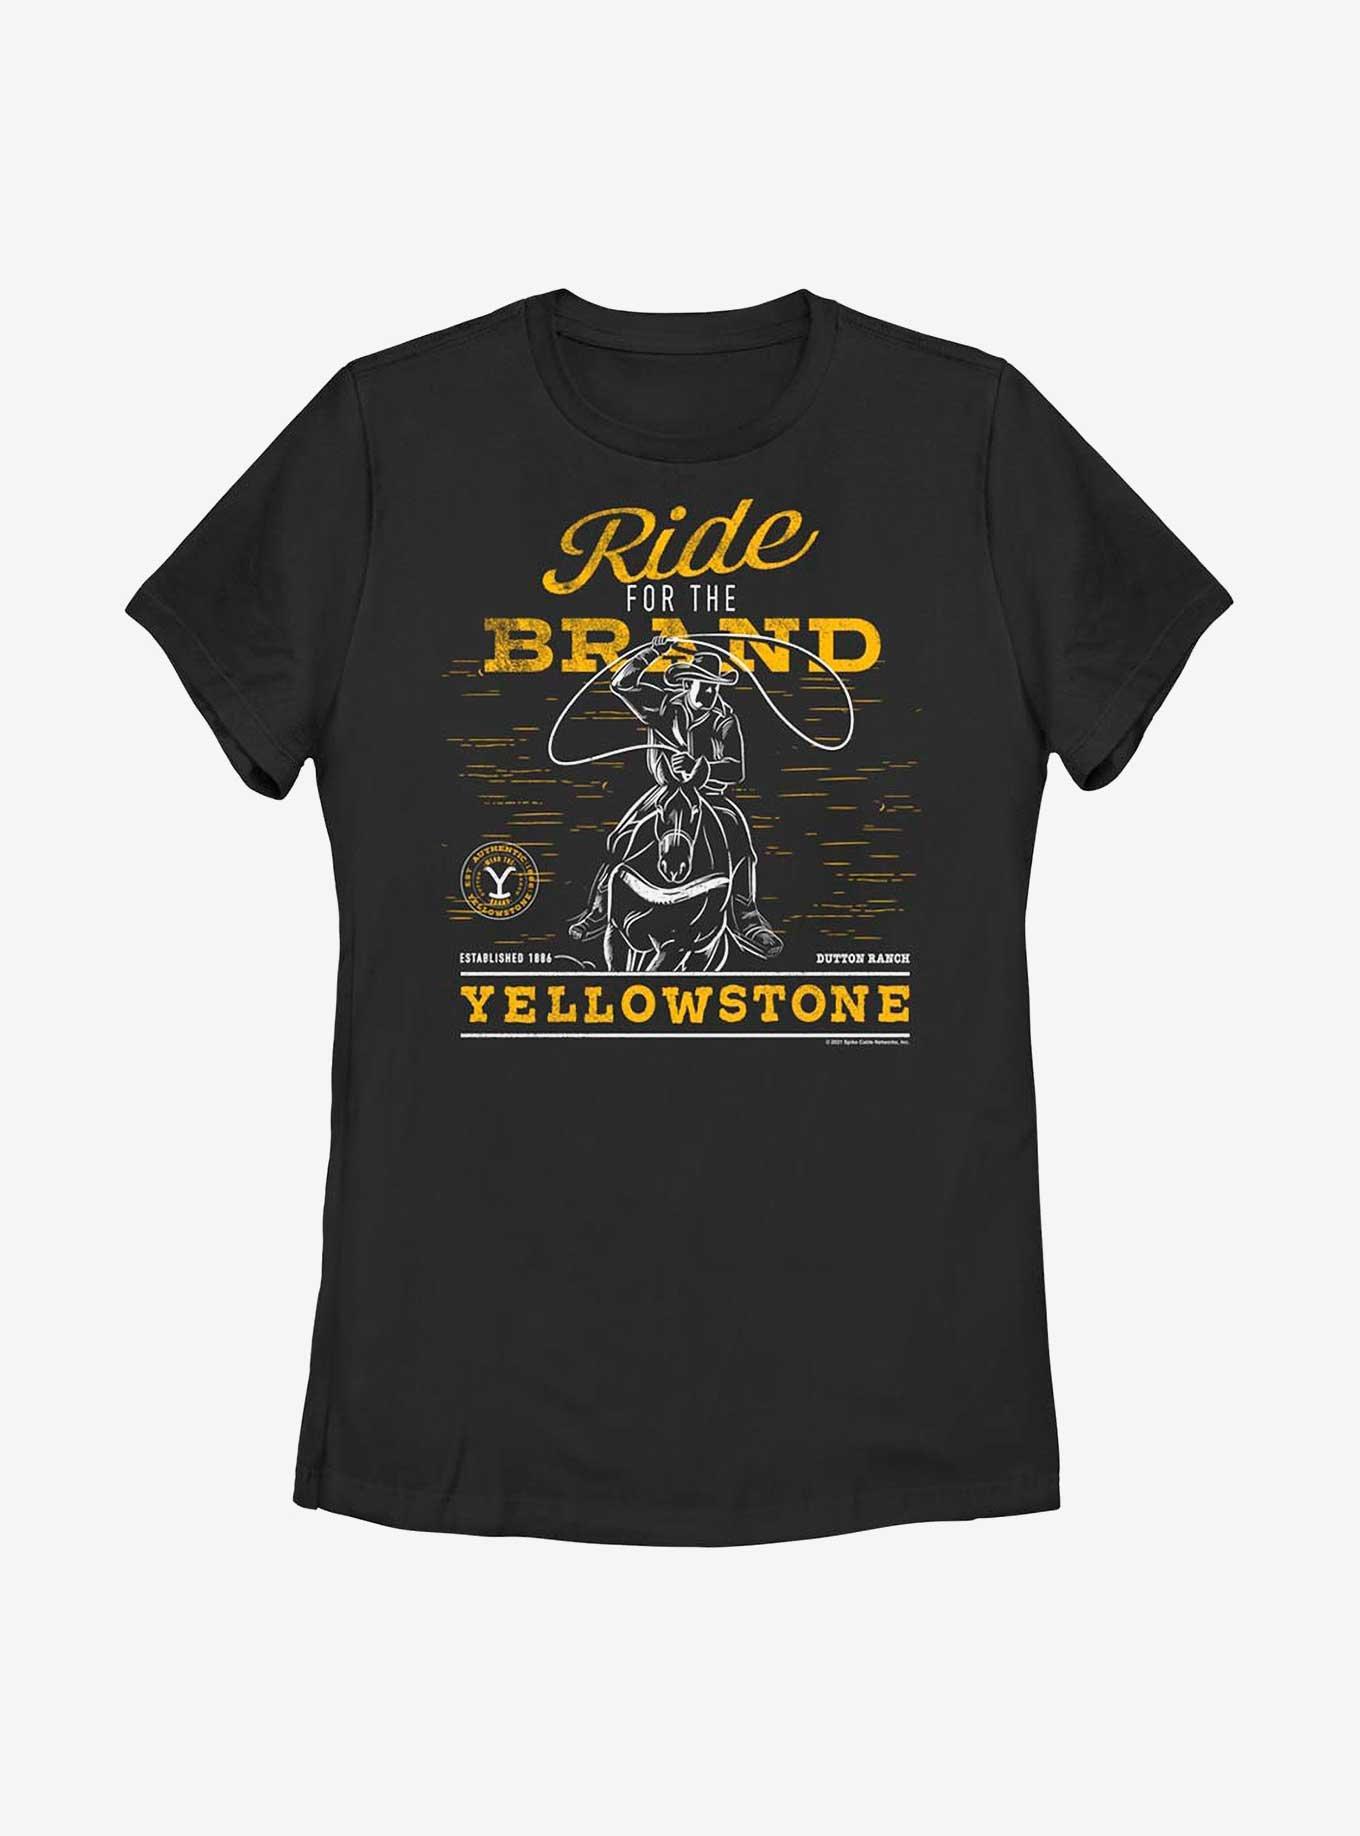 Yellowstone Ride For The Brand Womens T-Shirt, BLACK, hi-res